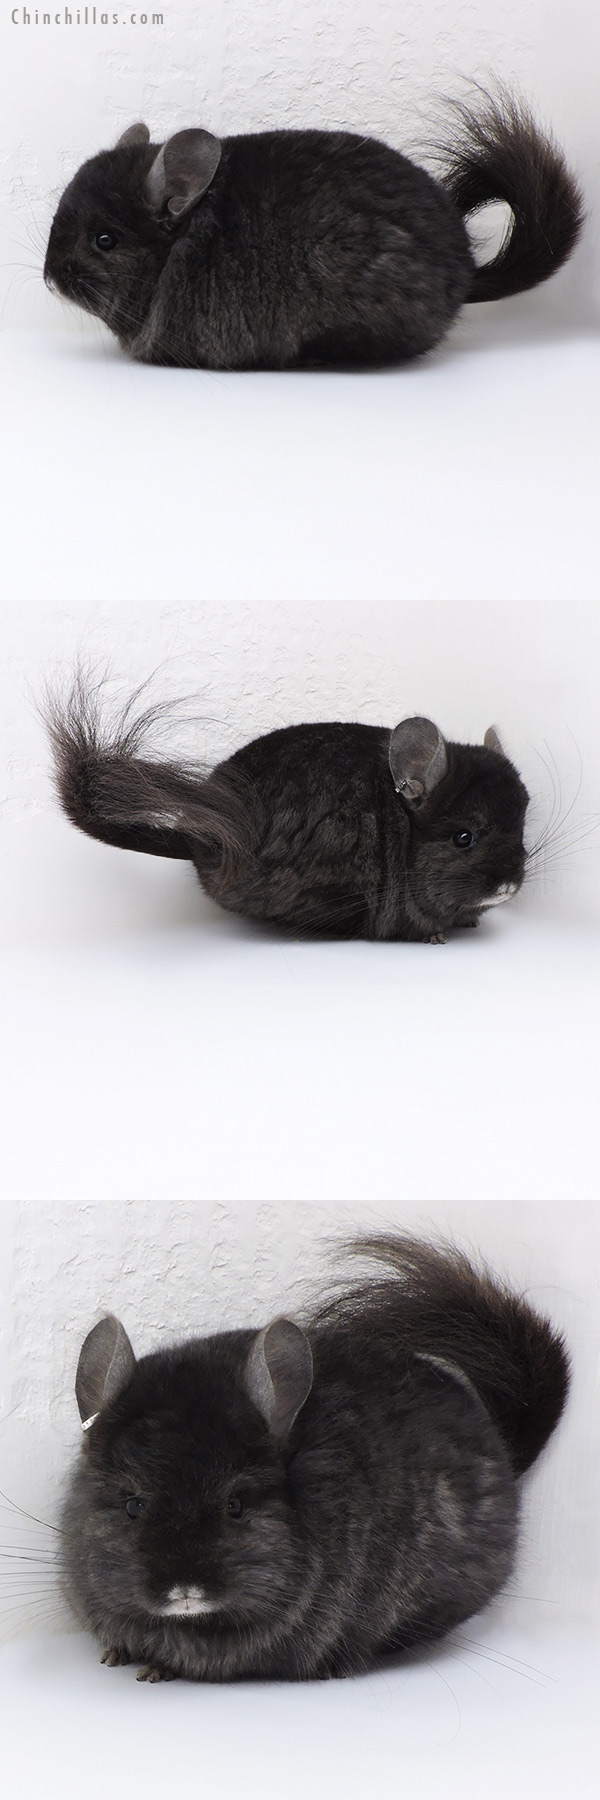 Chinchilla or related item offered for sale or export on Chinchillas.com - 18011 Blocky Ebony  Royal Persian Angora ( Locken Carrier ) Male Chinchilla